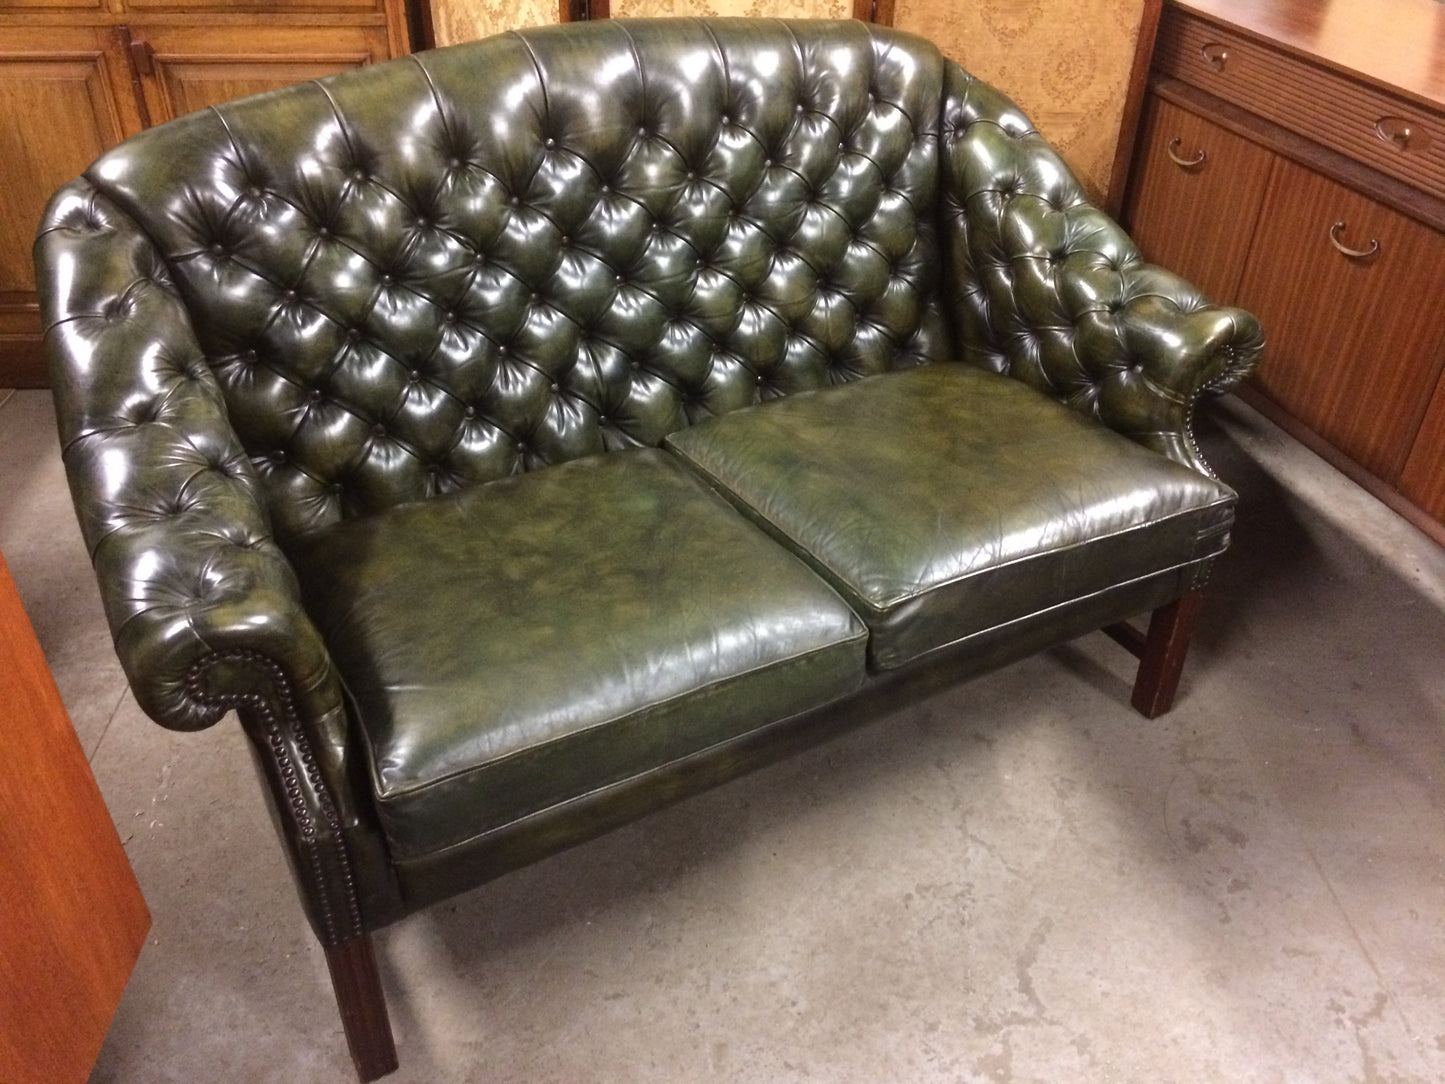 Vintage 1970'S Wade Hand Dyed "Antique" Green Leather Chesterfield 2 Seat Sofa